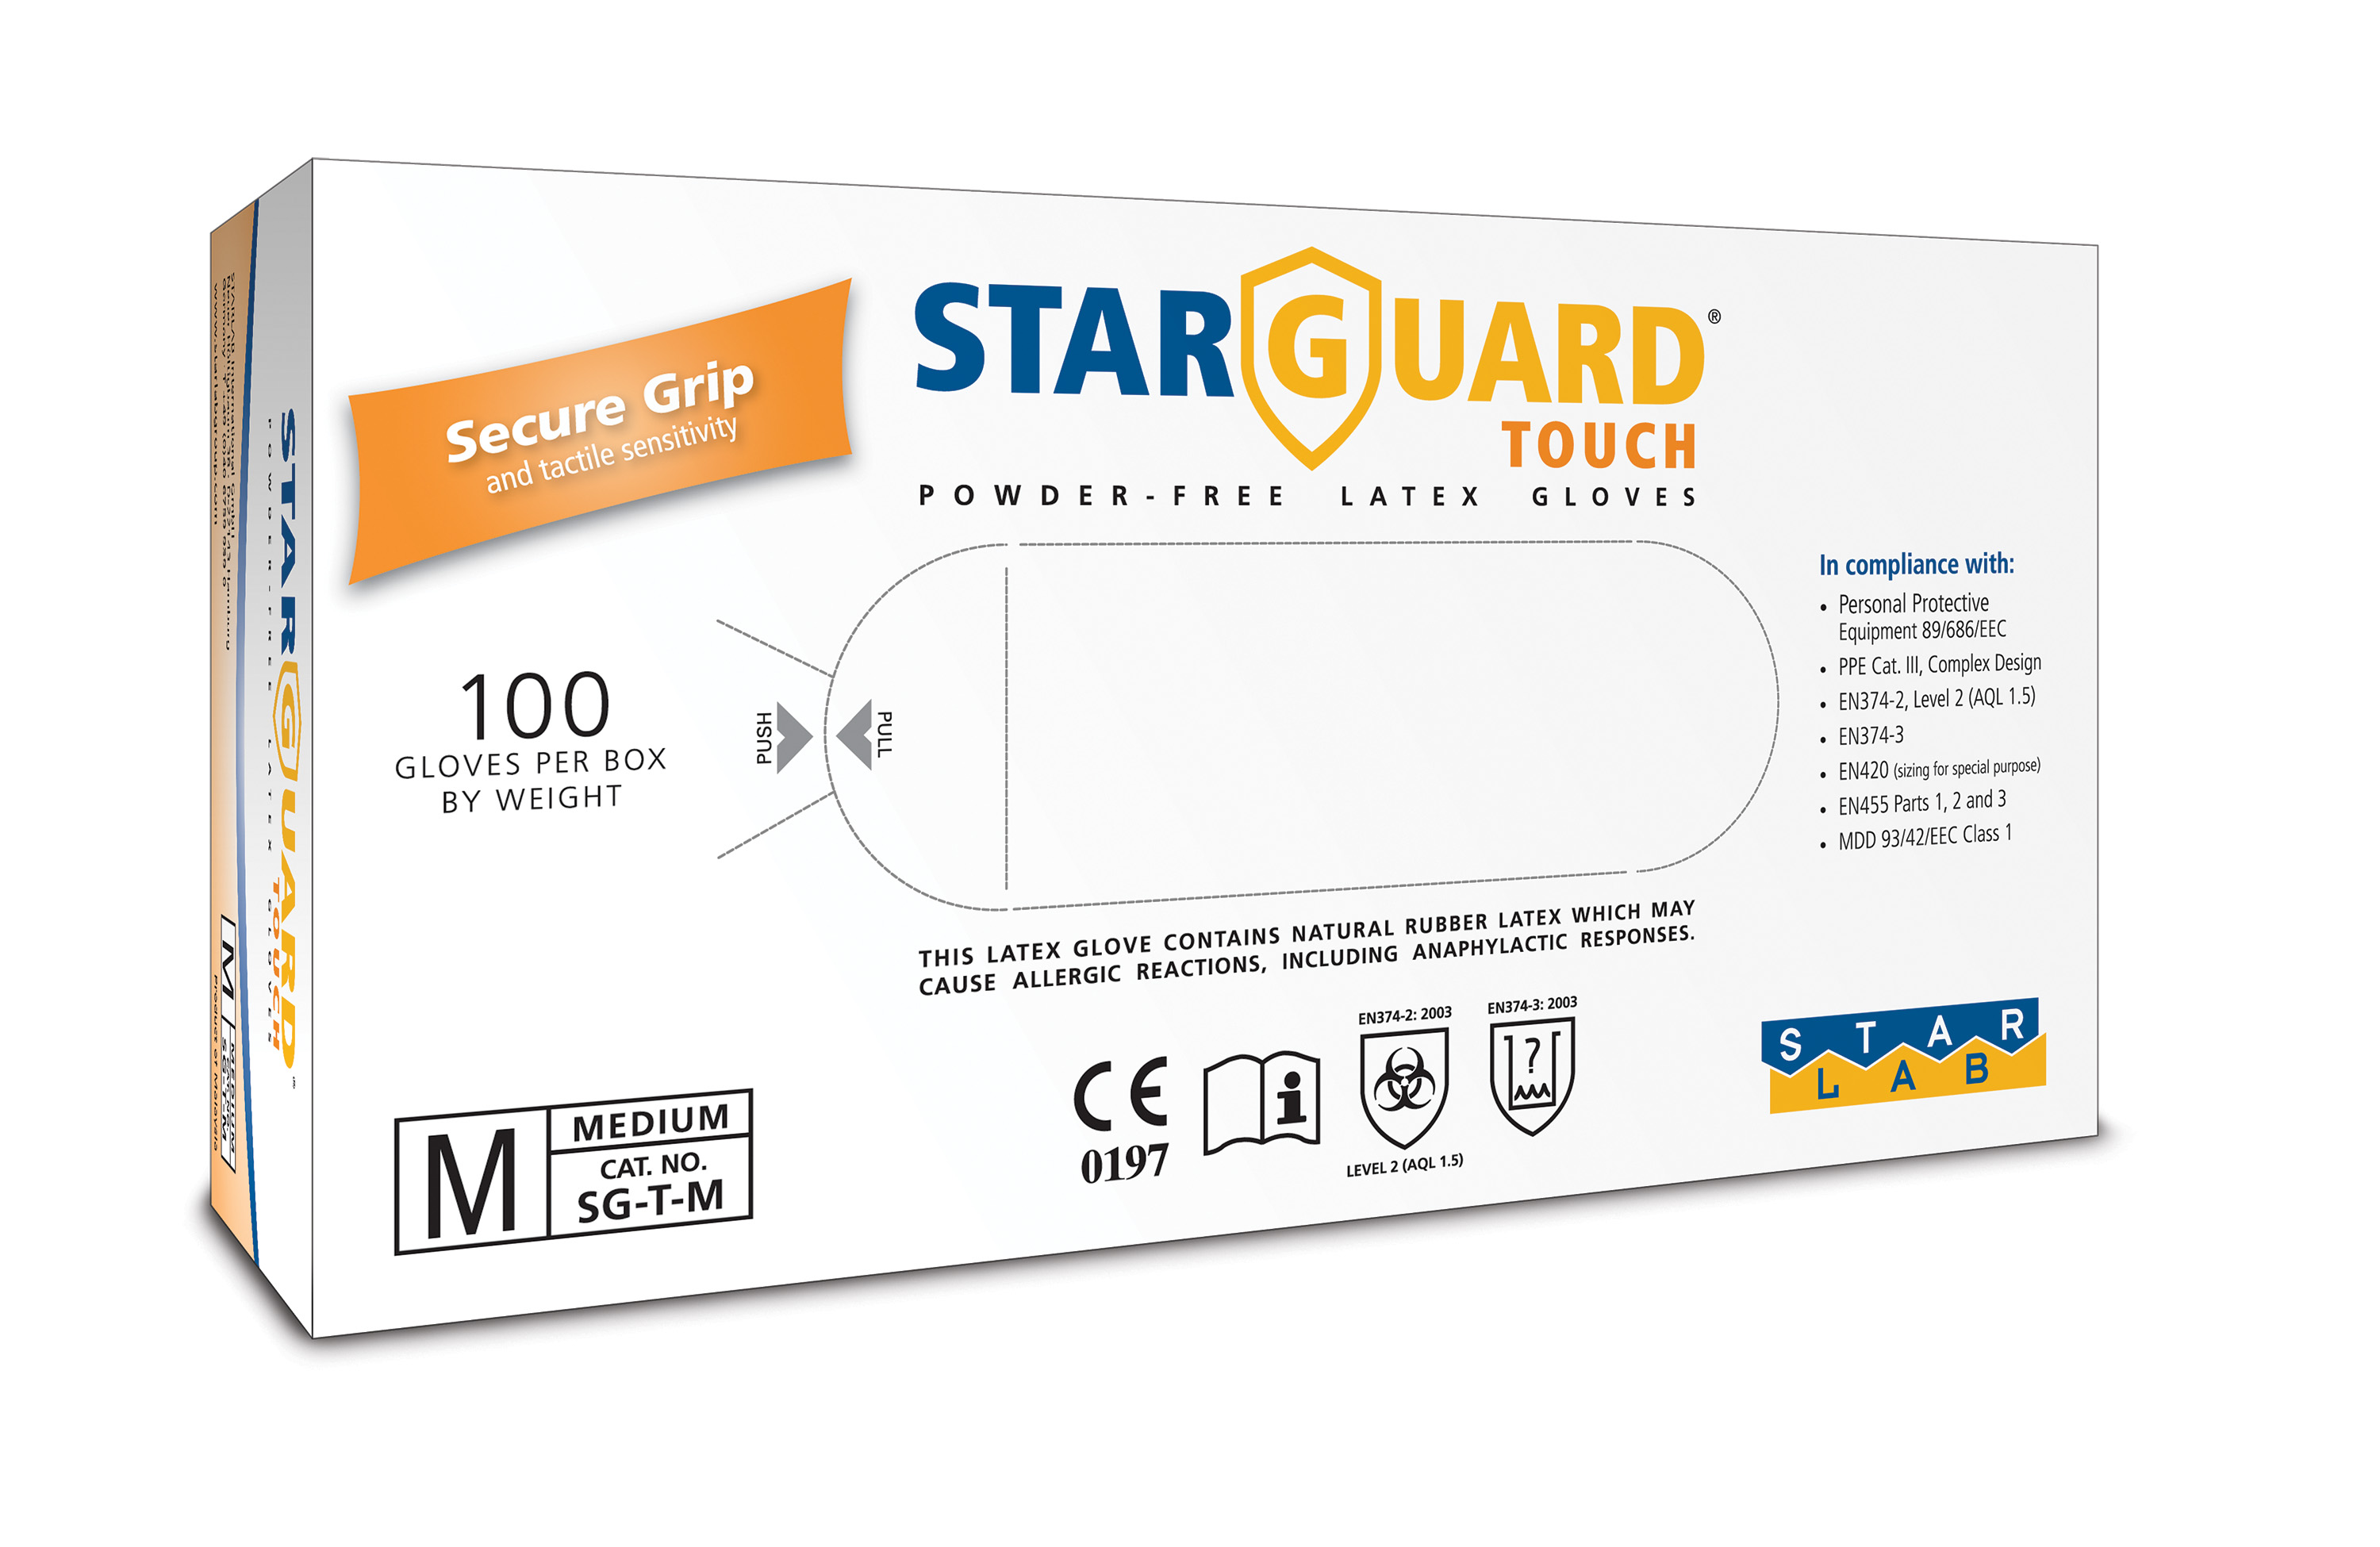  StarGuard TOUCH Latex Gloves, Powder Free, Natural, Size S, Pk/ 10 x 100 gloves.